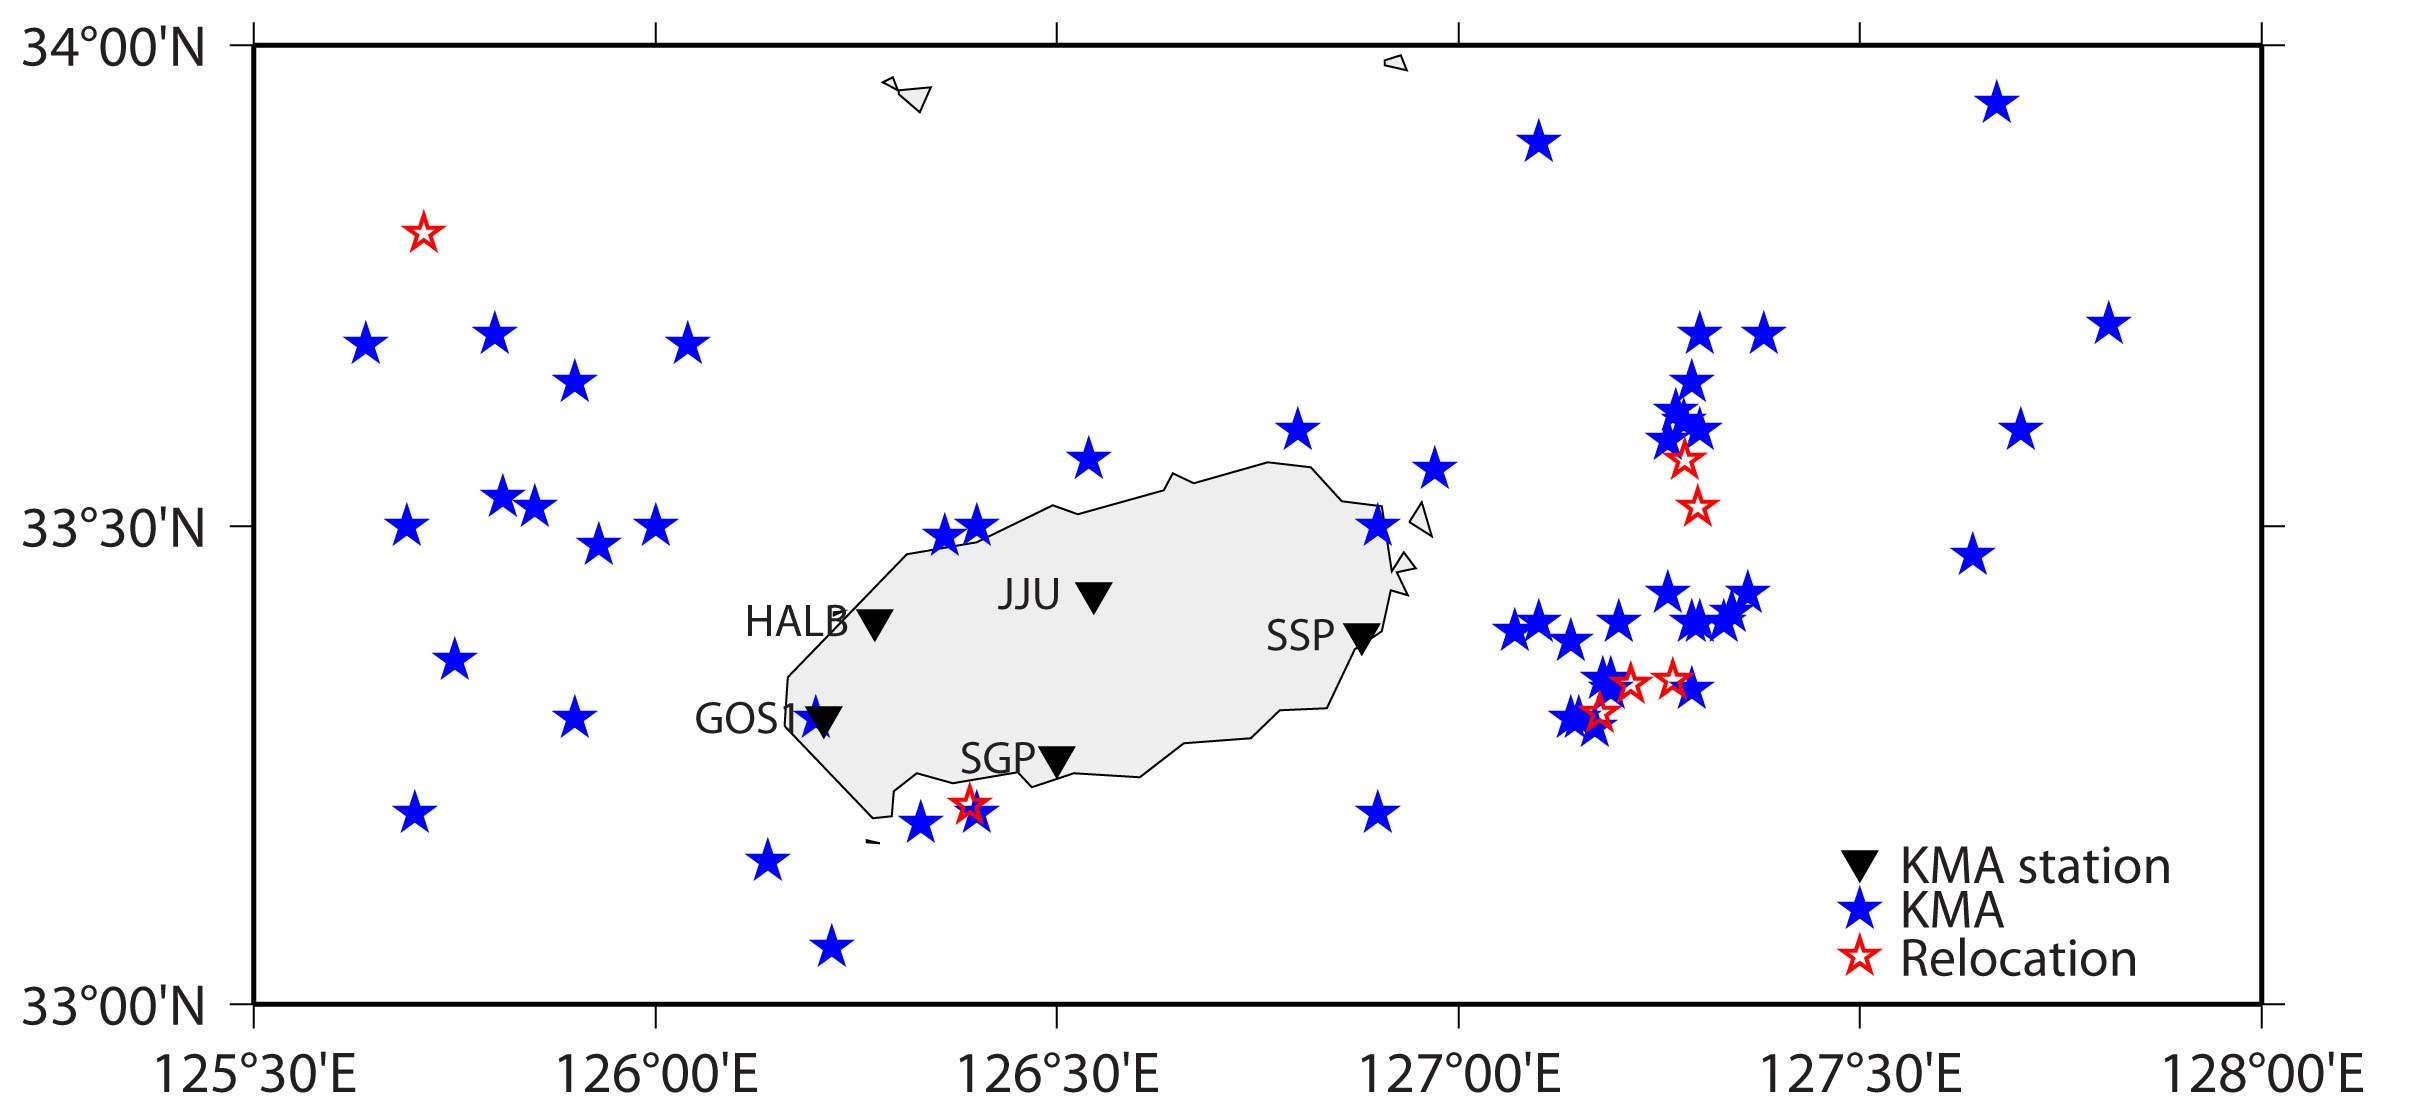 Fig. 2.1.11 Earthquake epicenters located by NIMR (2012.11-2013.01) and reported by KMA (since 1978) in and around Jeju Island.